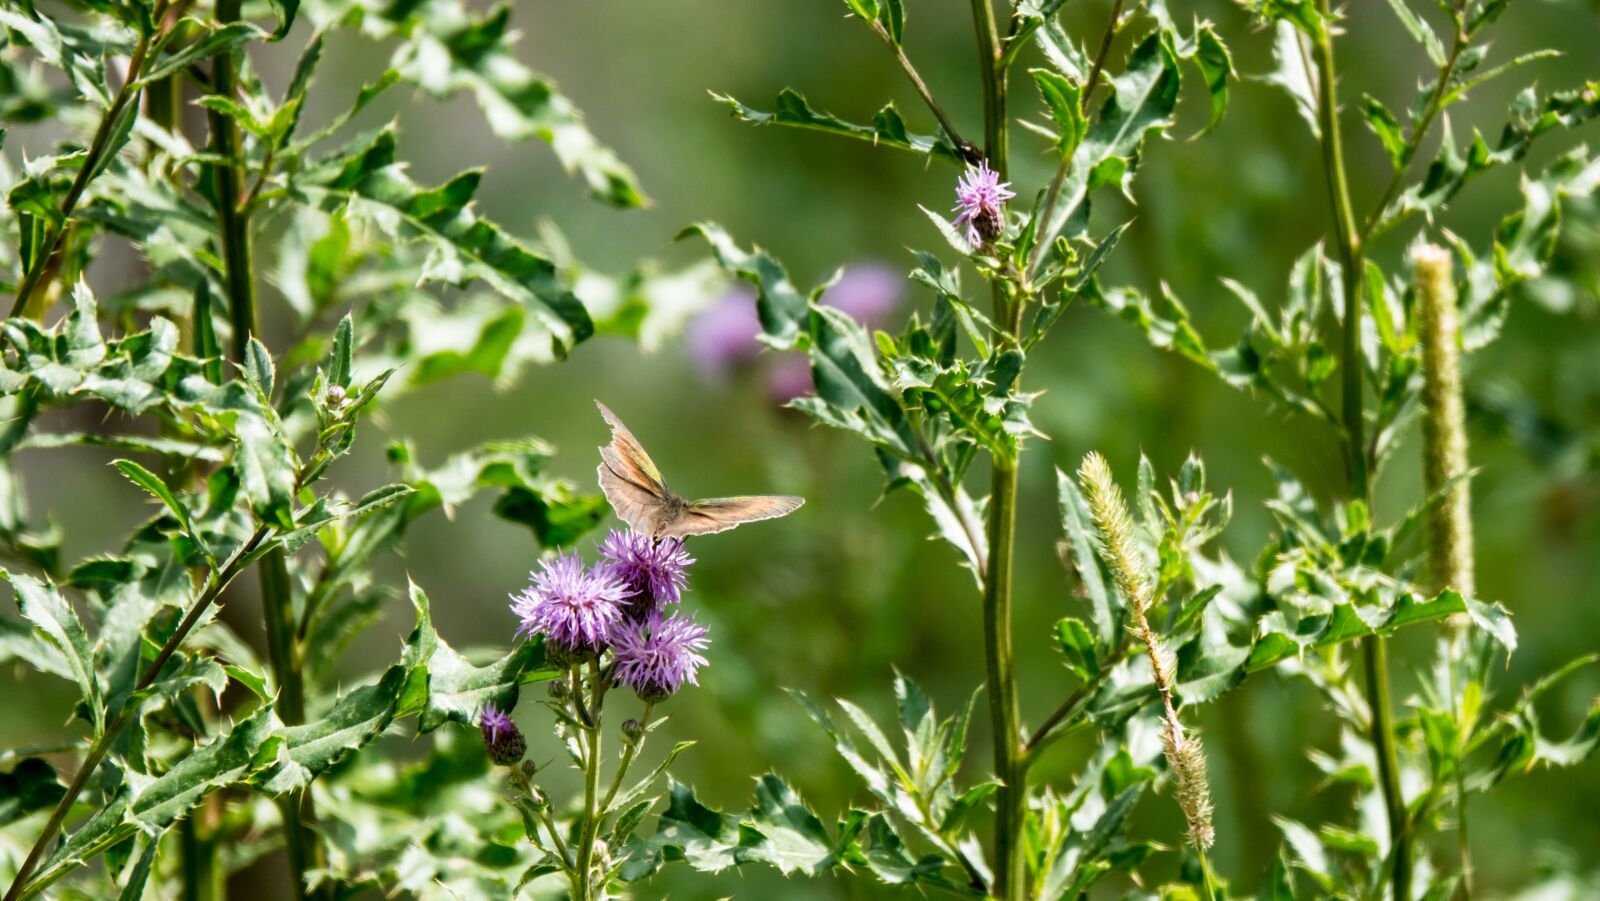 Sony Cyber-shot DSC-RX10 IV sample photo. Thistle, butterfly, nature photography